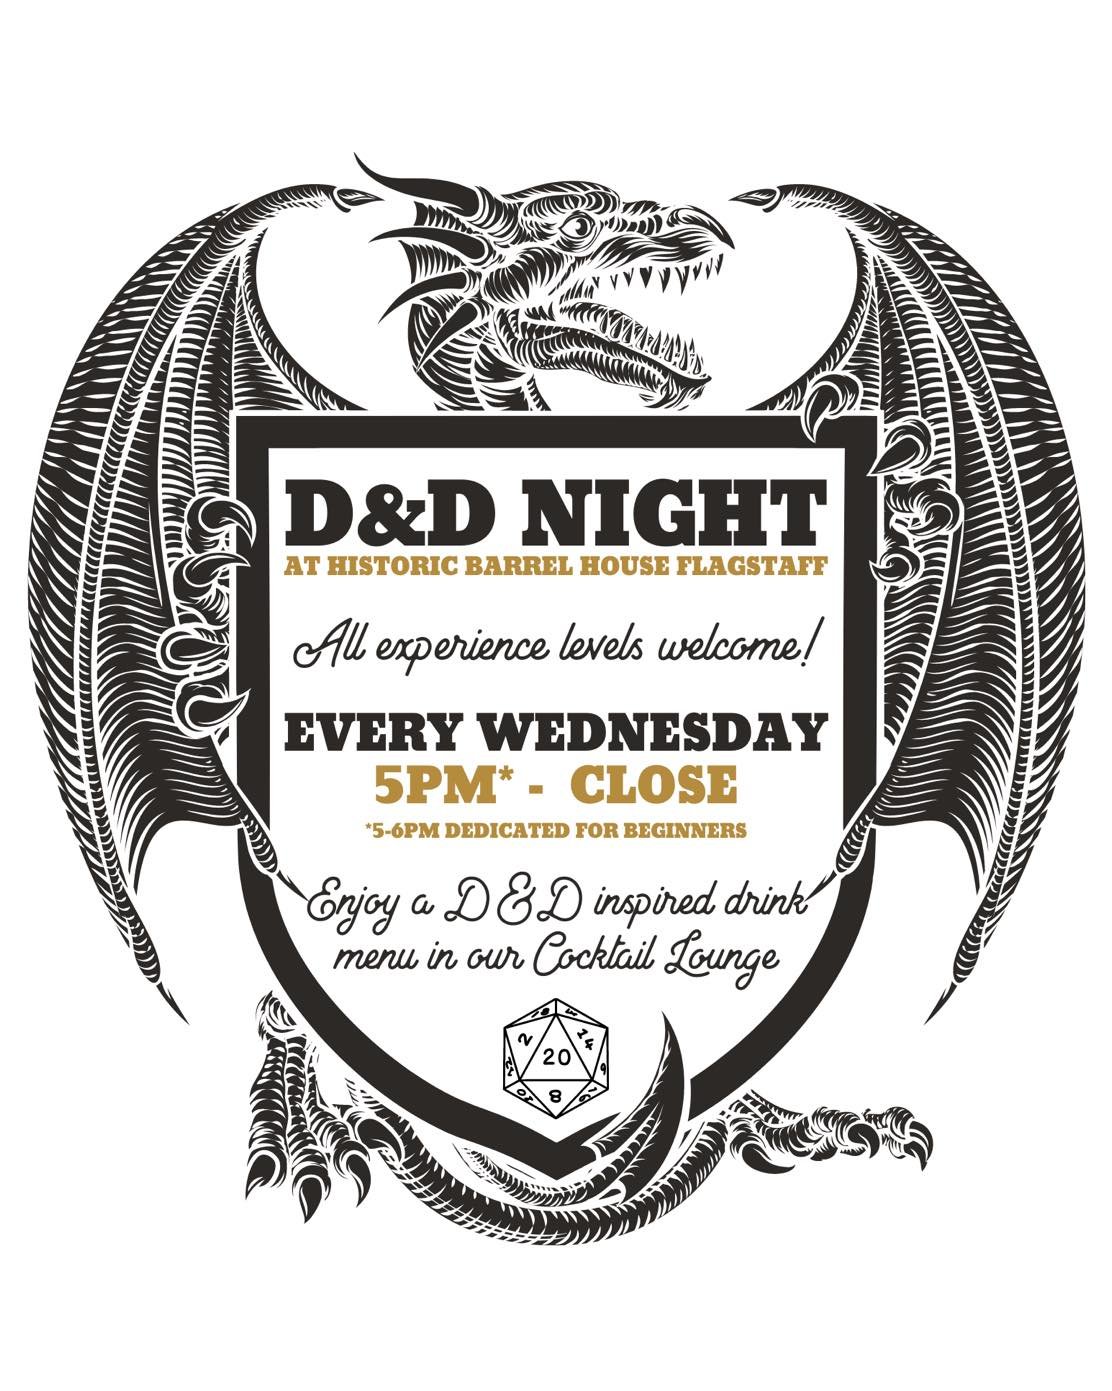 Get your dice ready for a night of magic and mystery in our cocktail lounge at Historic Barrel House - Flagstaff's. Join us as we play Dungeons &amp; Dragons every Wednesday! 🧙&zwj;♂️🎲
&mdash;
110 S San Francisco St - Flagstaff, AZ
&bull;
&bull;
&b